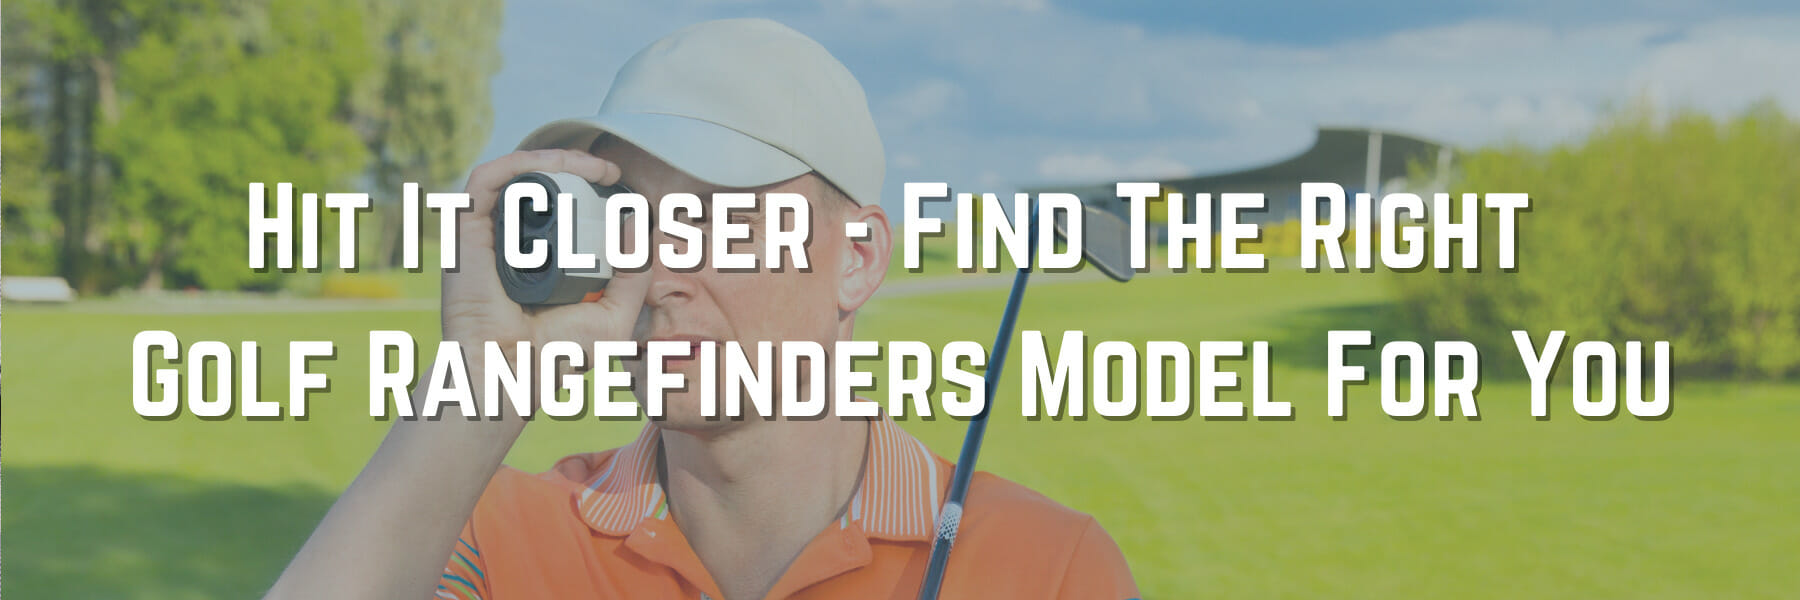 Hit It Closer - Find The Right Golf Rangefinder Model For You